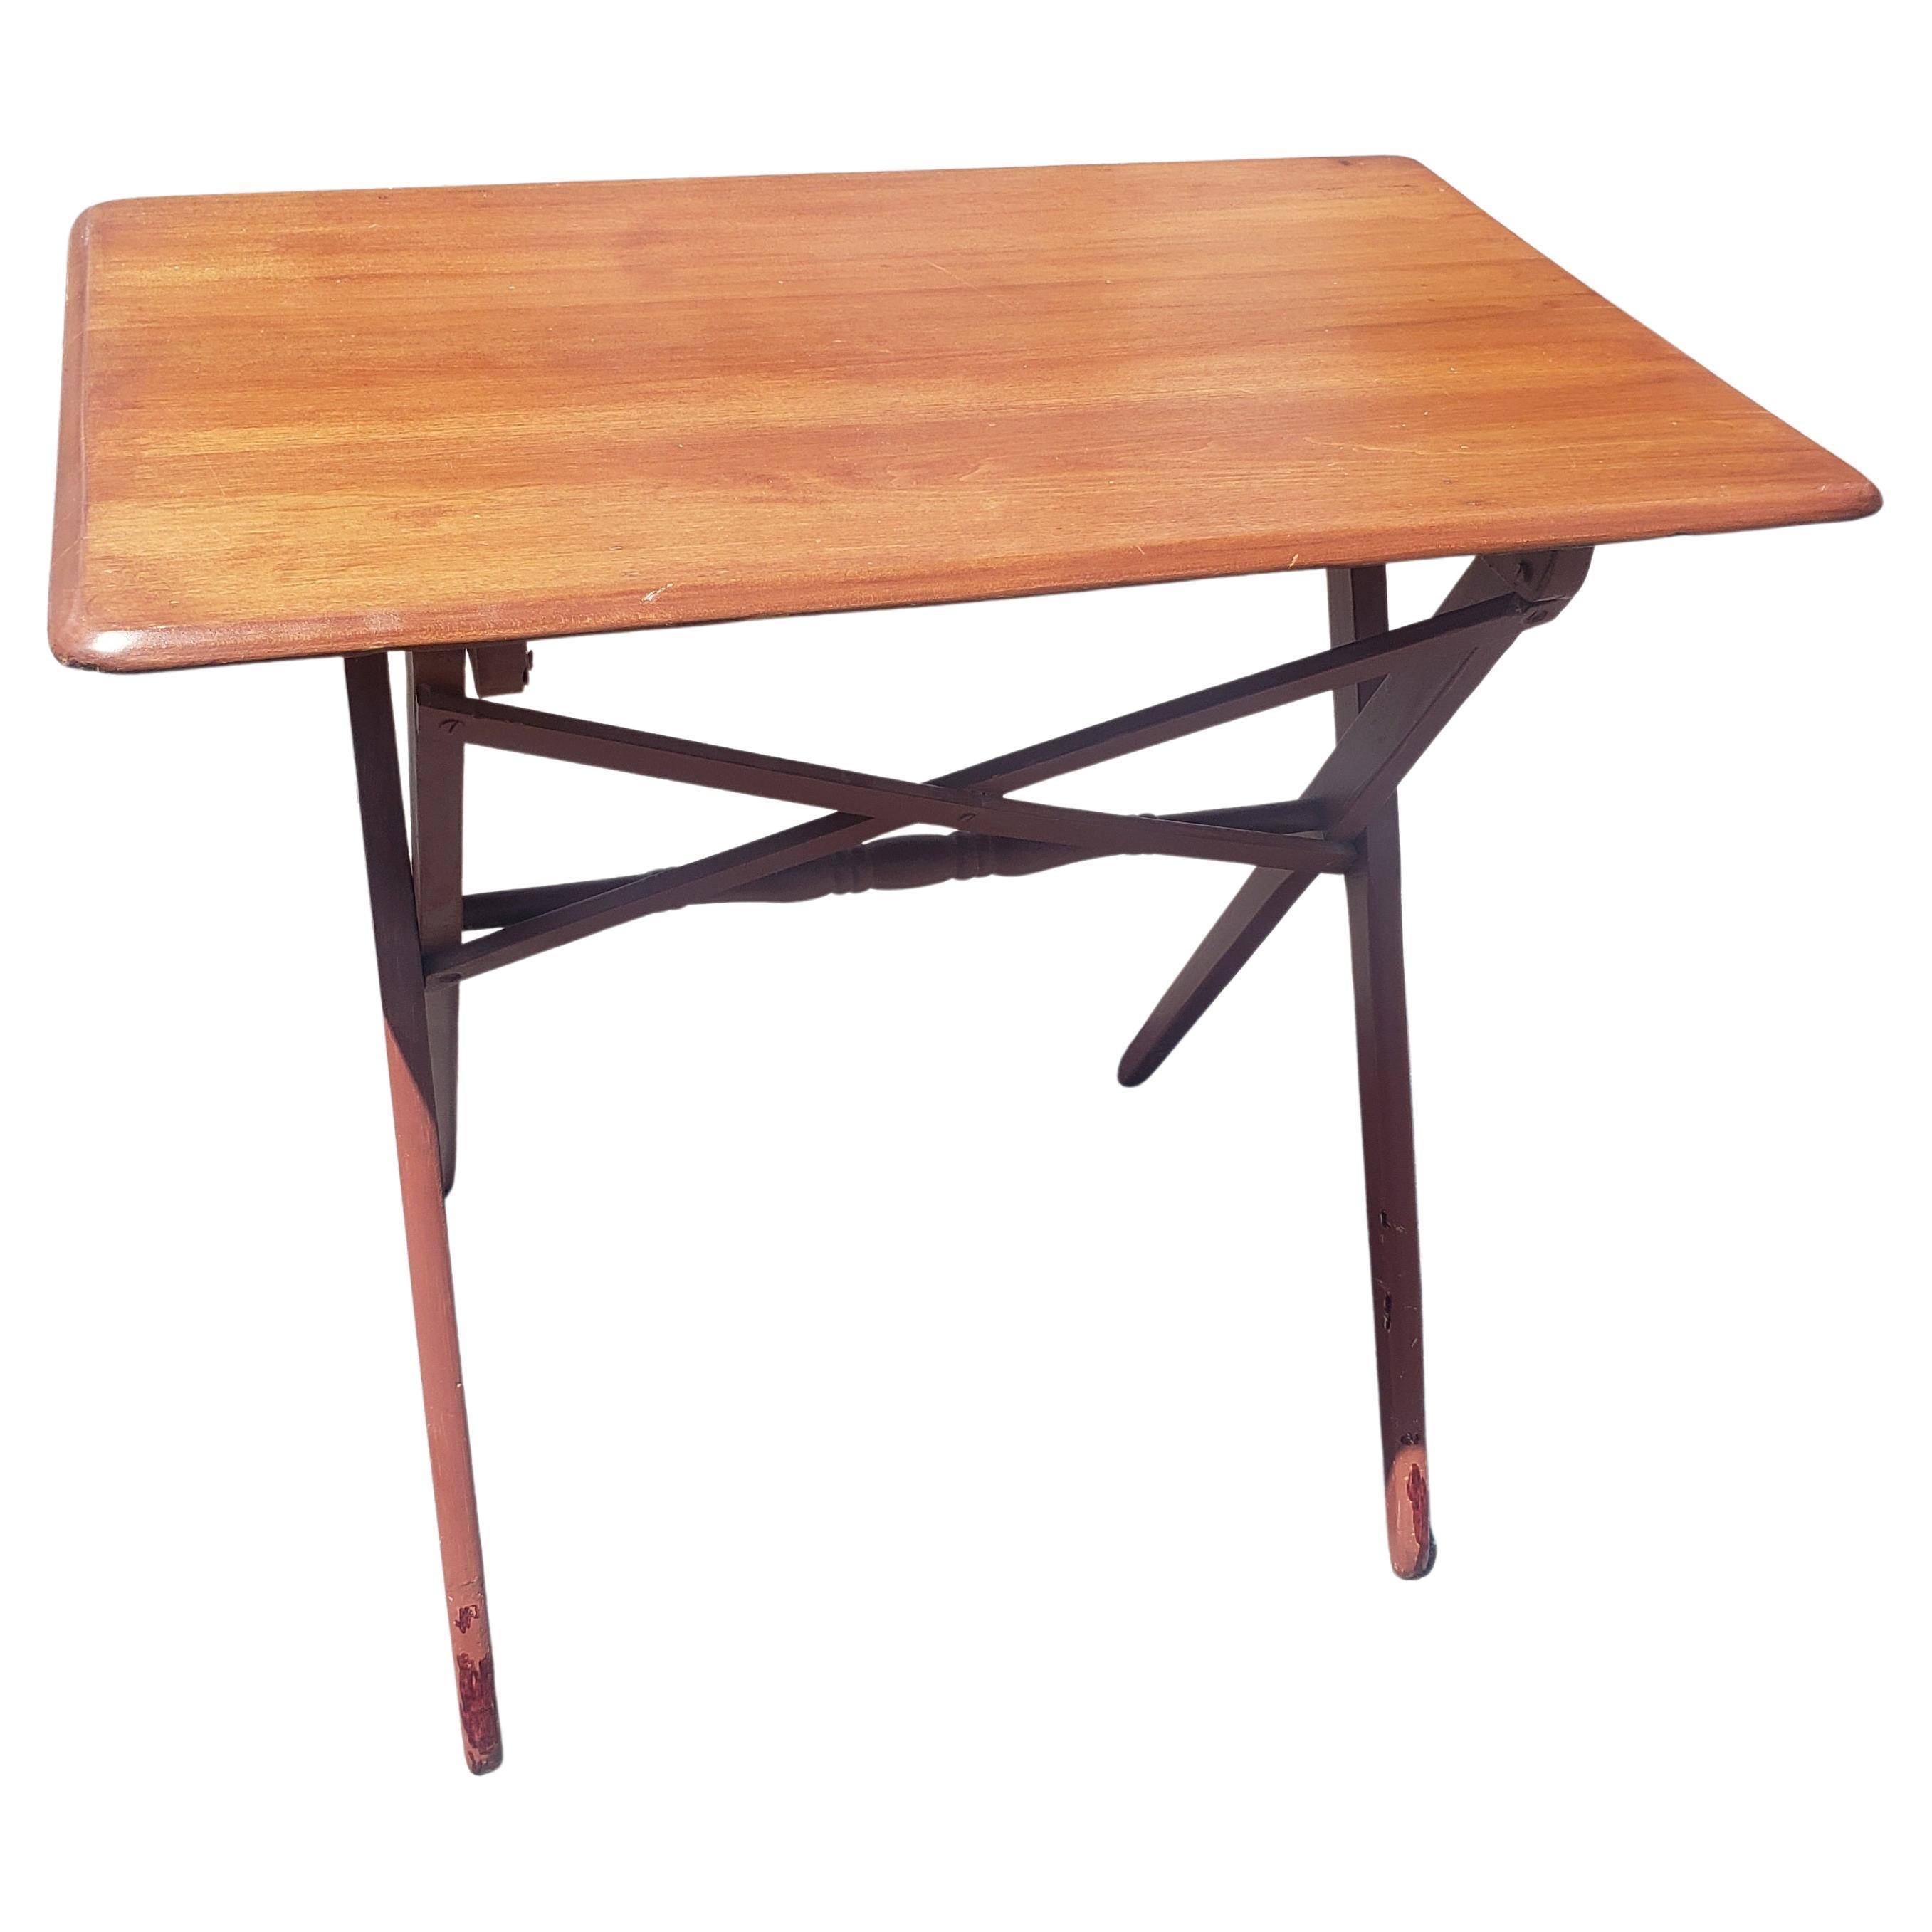 A Mid-Century Stained Maple Adjustable Height Folding Table

Measures 30